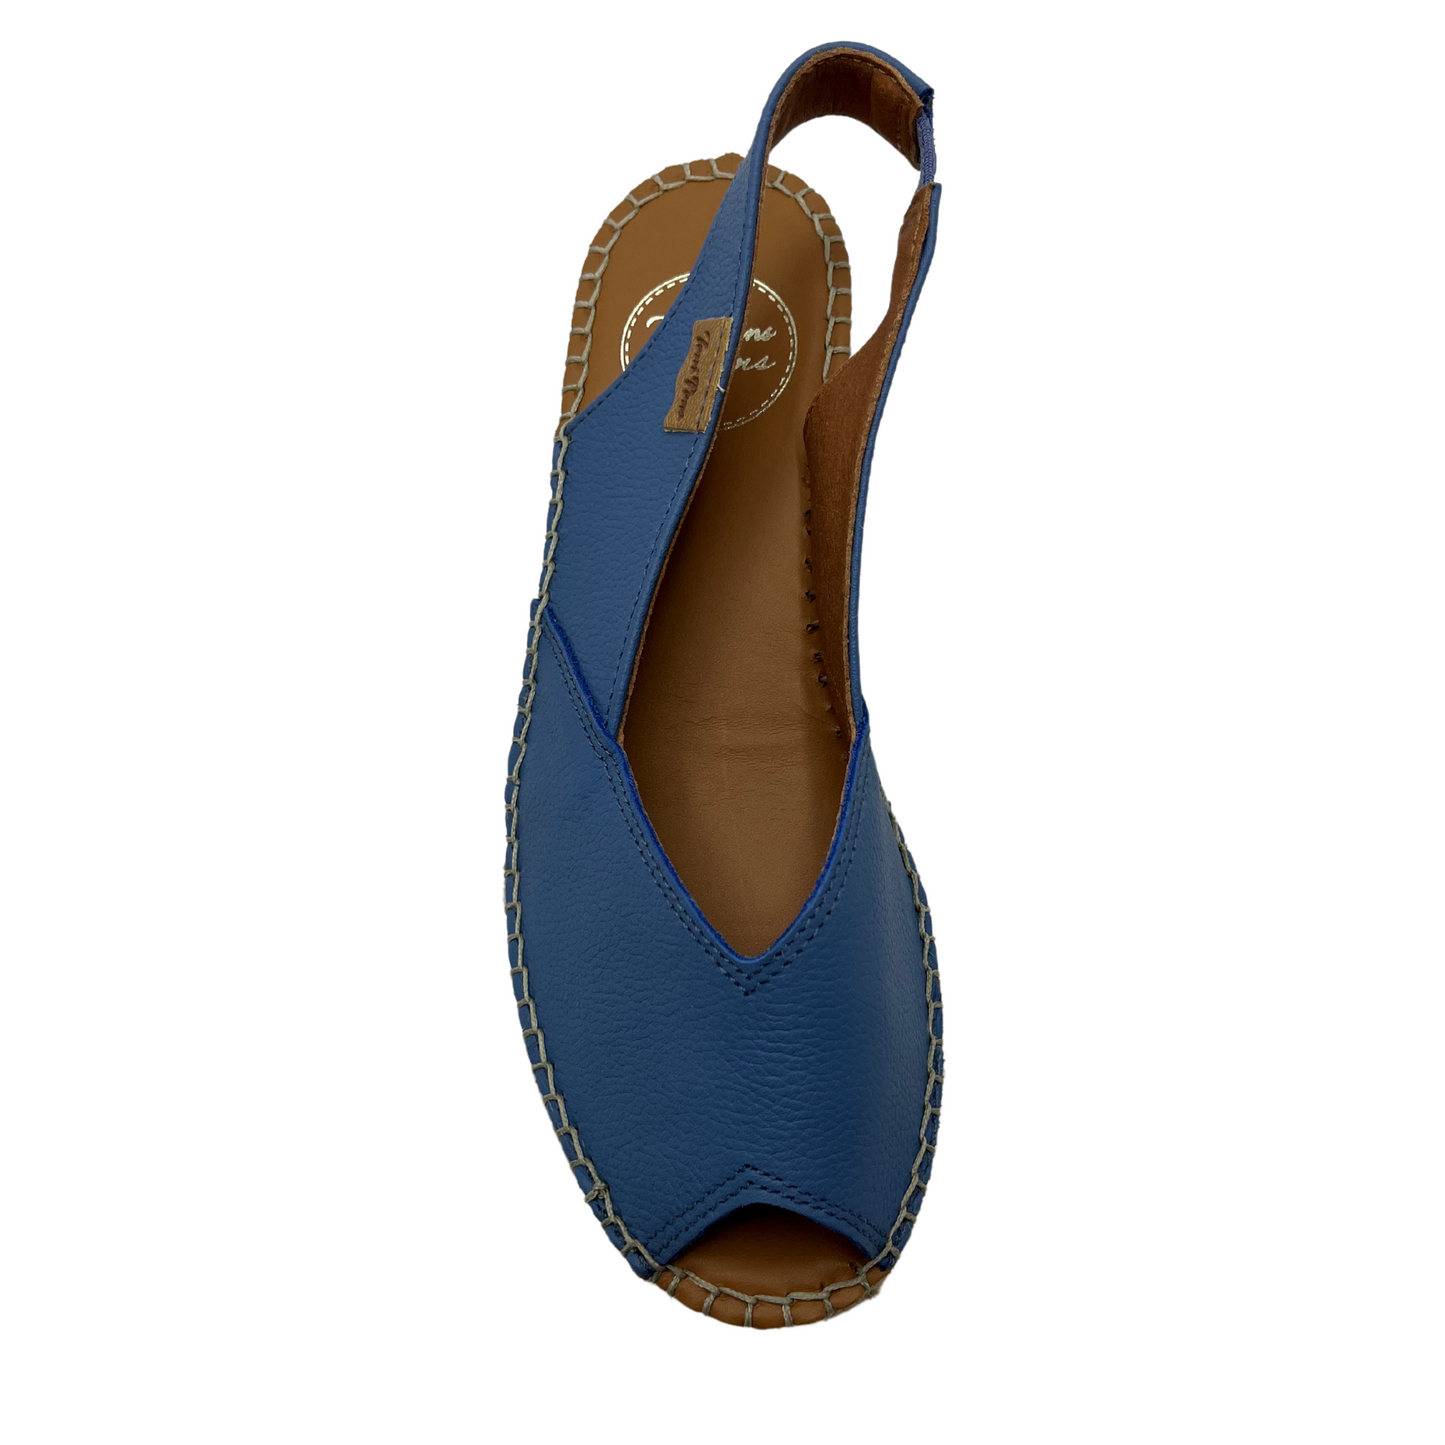 Top view of a whte espadrille sandal with a peep toe opening and heel strap. Shown in denim